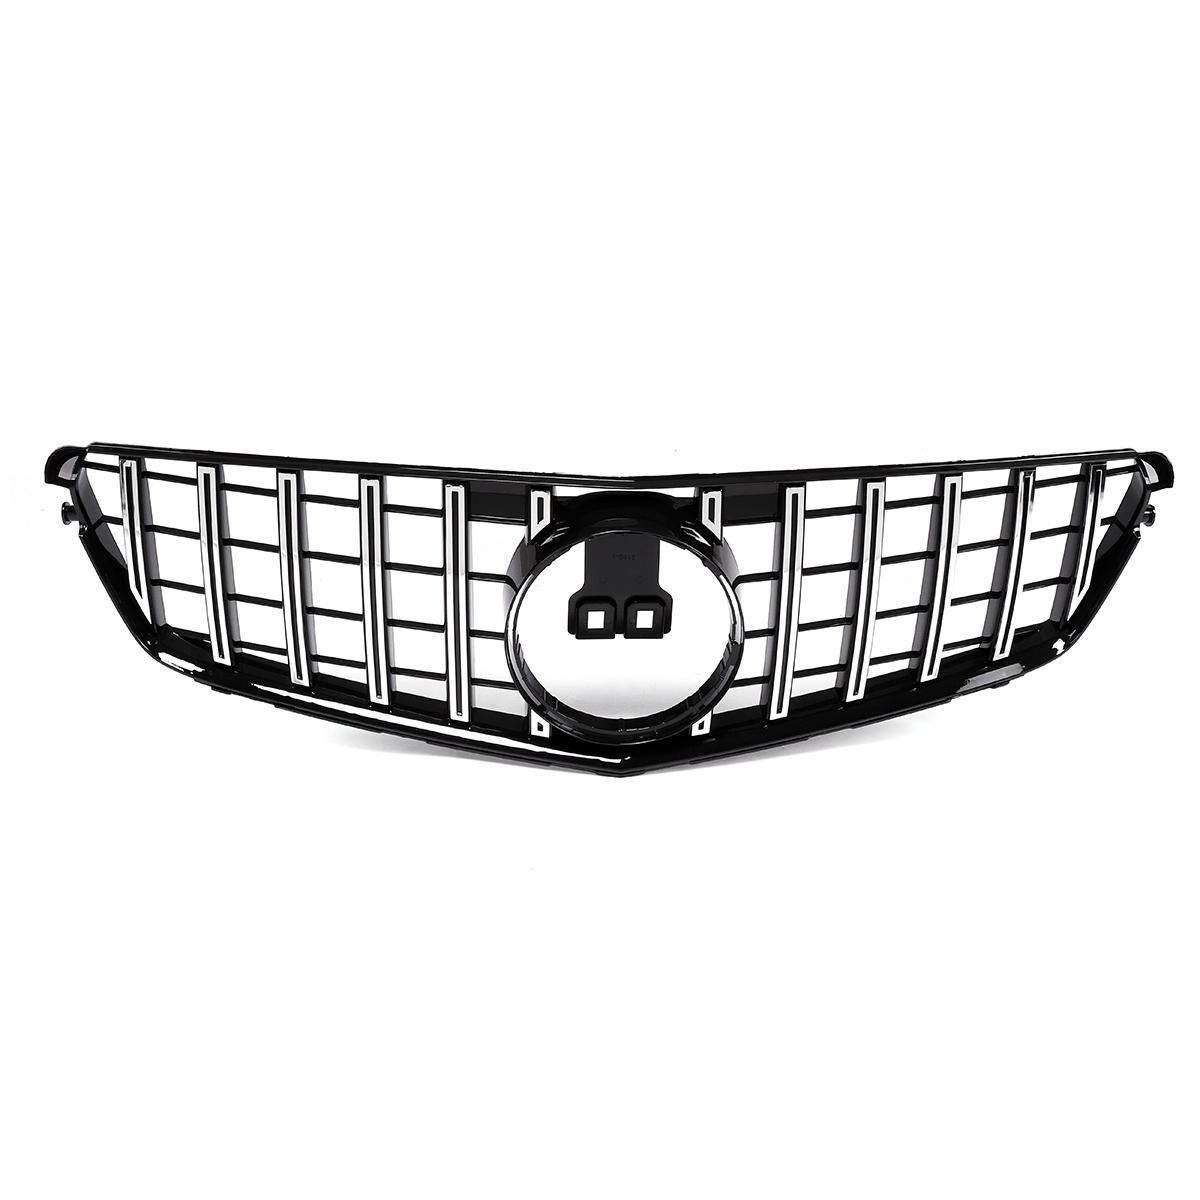 Chrome Silver GT R AMG Style Front Grill Grille For 08-14 Mercedes Benz C-Class W204 C200 C300